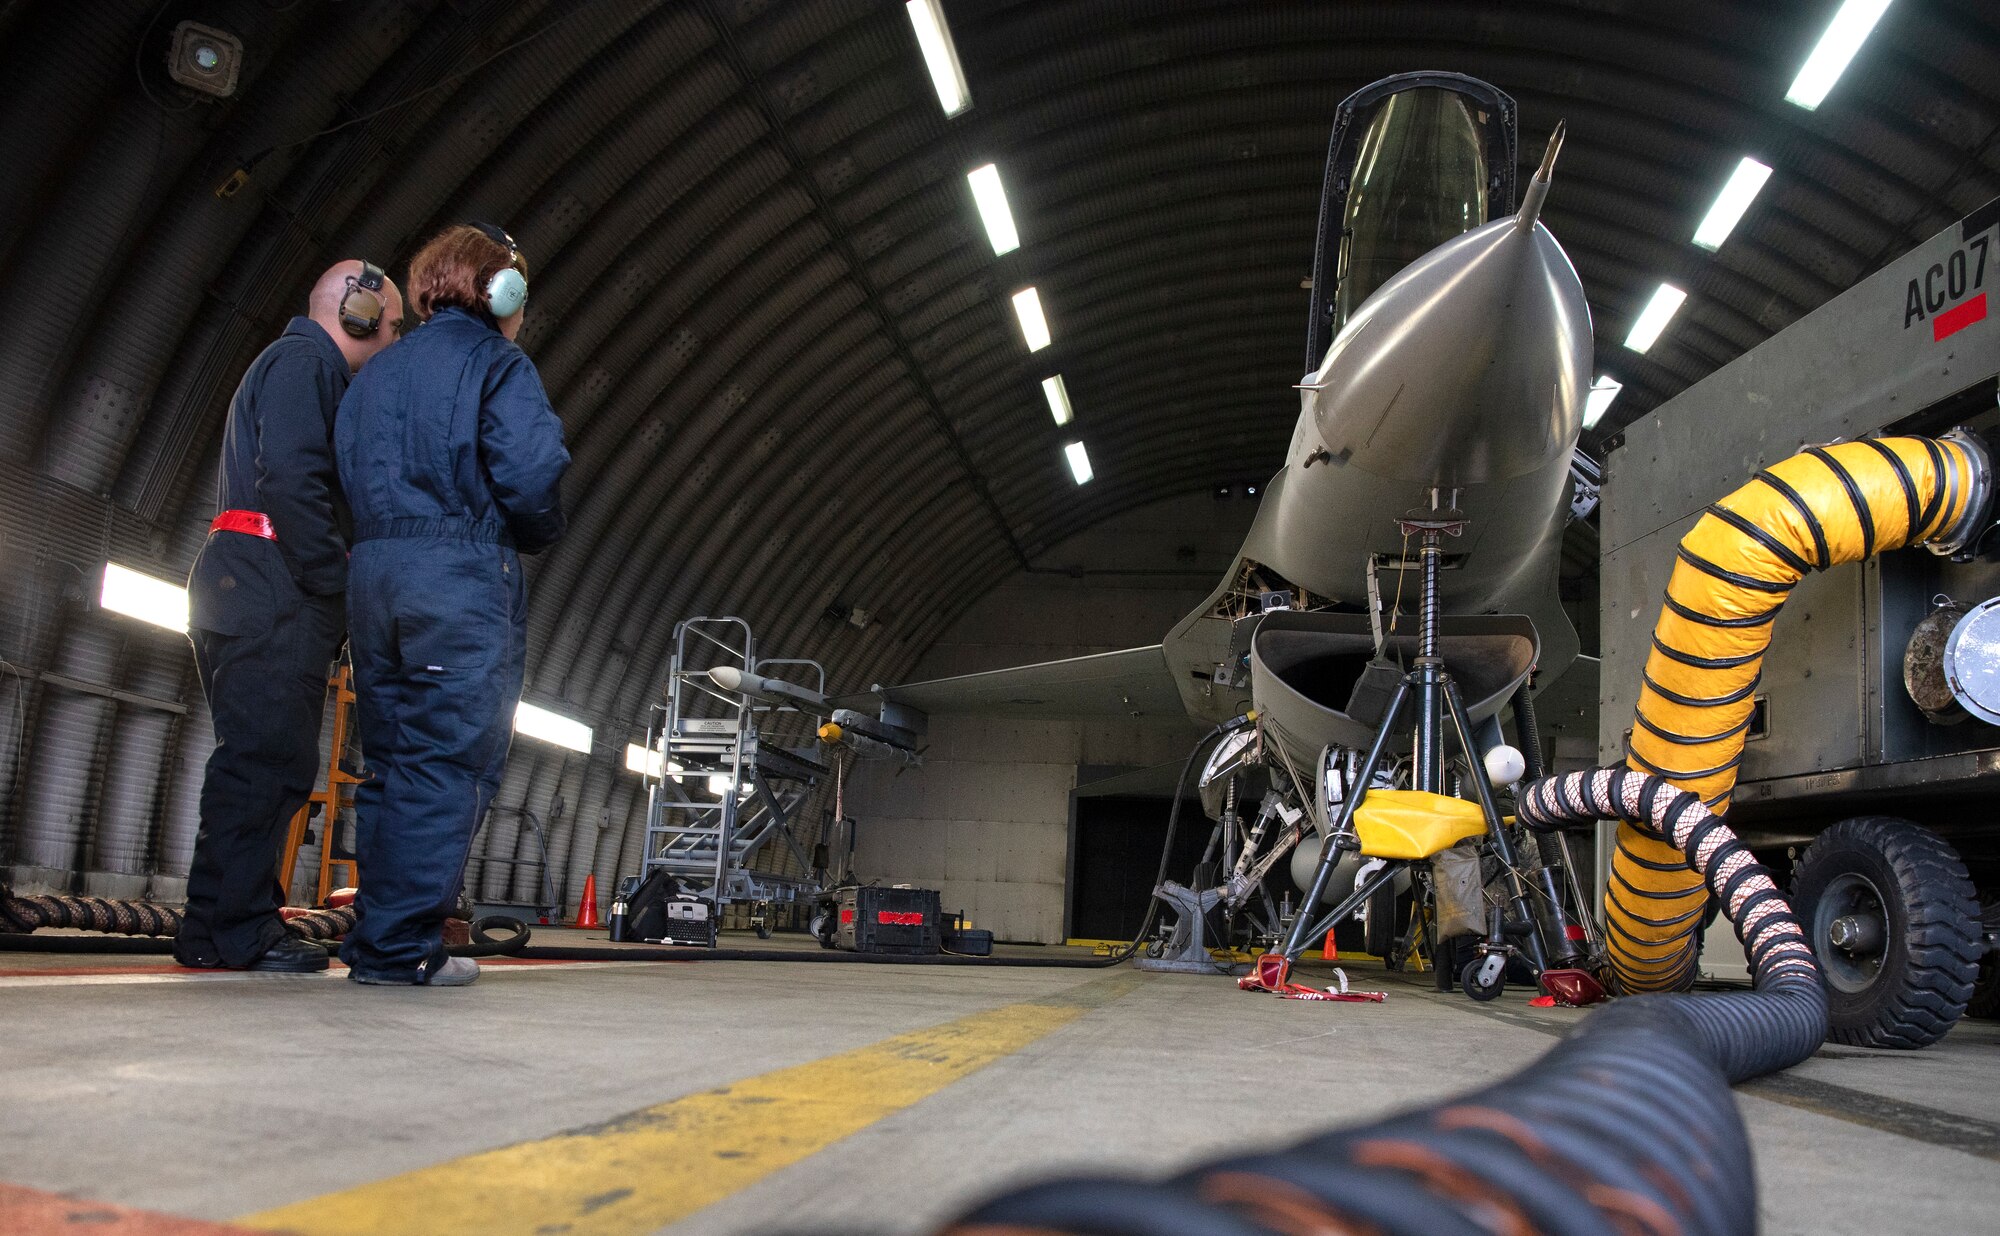 U.S. Air Force Staff Sgt. Stephanie Gillie, 52nd Security Forces Squadron investigator, right, and Senior Airman Jose Pagan, 52nd Aircraft Maintenance Squadron assistant dedicated crew chief, left, observe a F-16 Fighting Falcon landing gear inspection at Spangdahlem Air Base, Germany, April 3, 2019. Gillie's participation was part of the 52nd AMXS Crew Chief for a Day program. The program gives Airmen that don't work on the flightline a bigger picture of the 52nd Fighter Wing mission. (U.S. Air Force photo by Airman 1st Class Valerie Seelye)